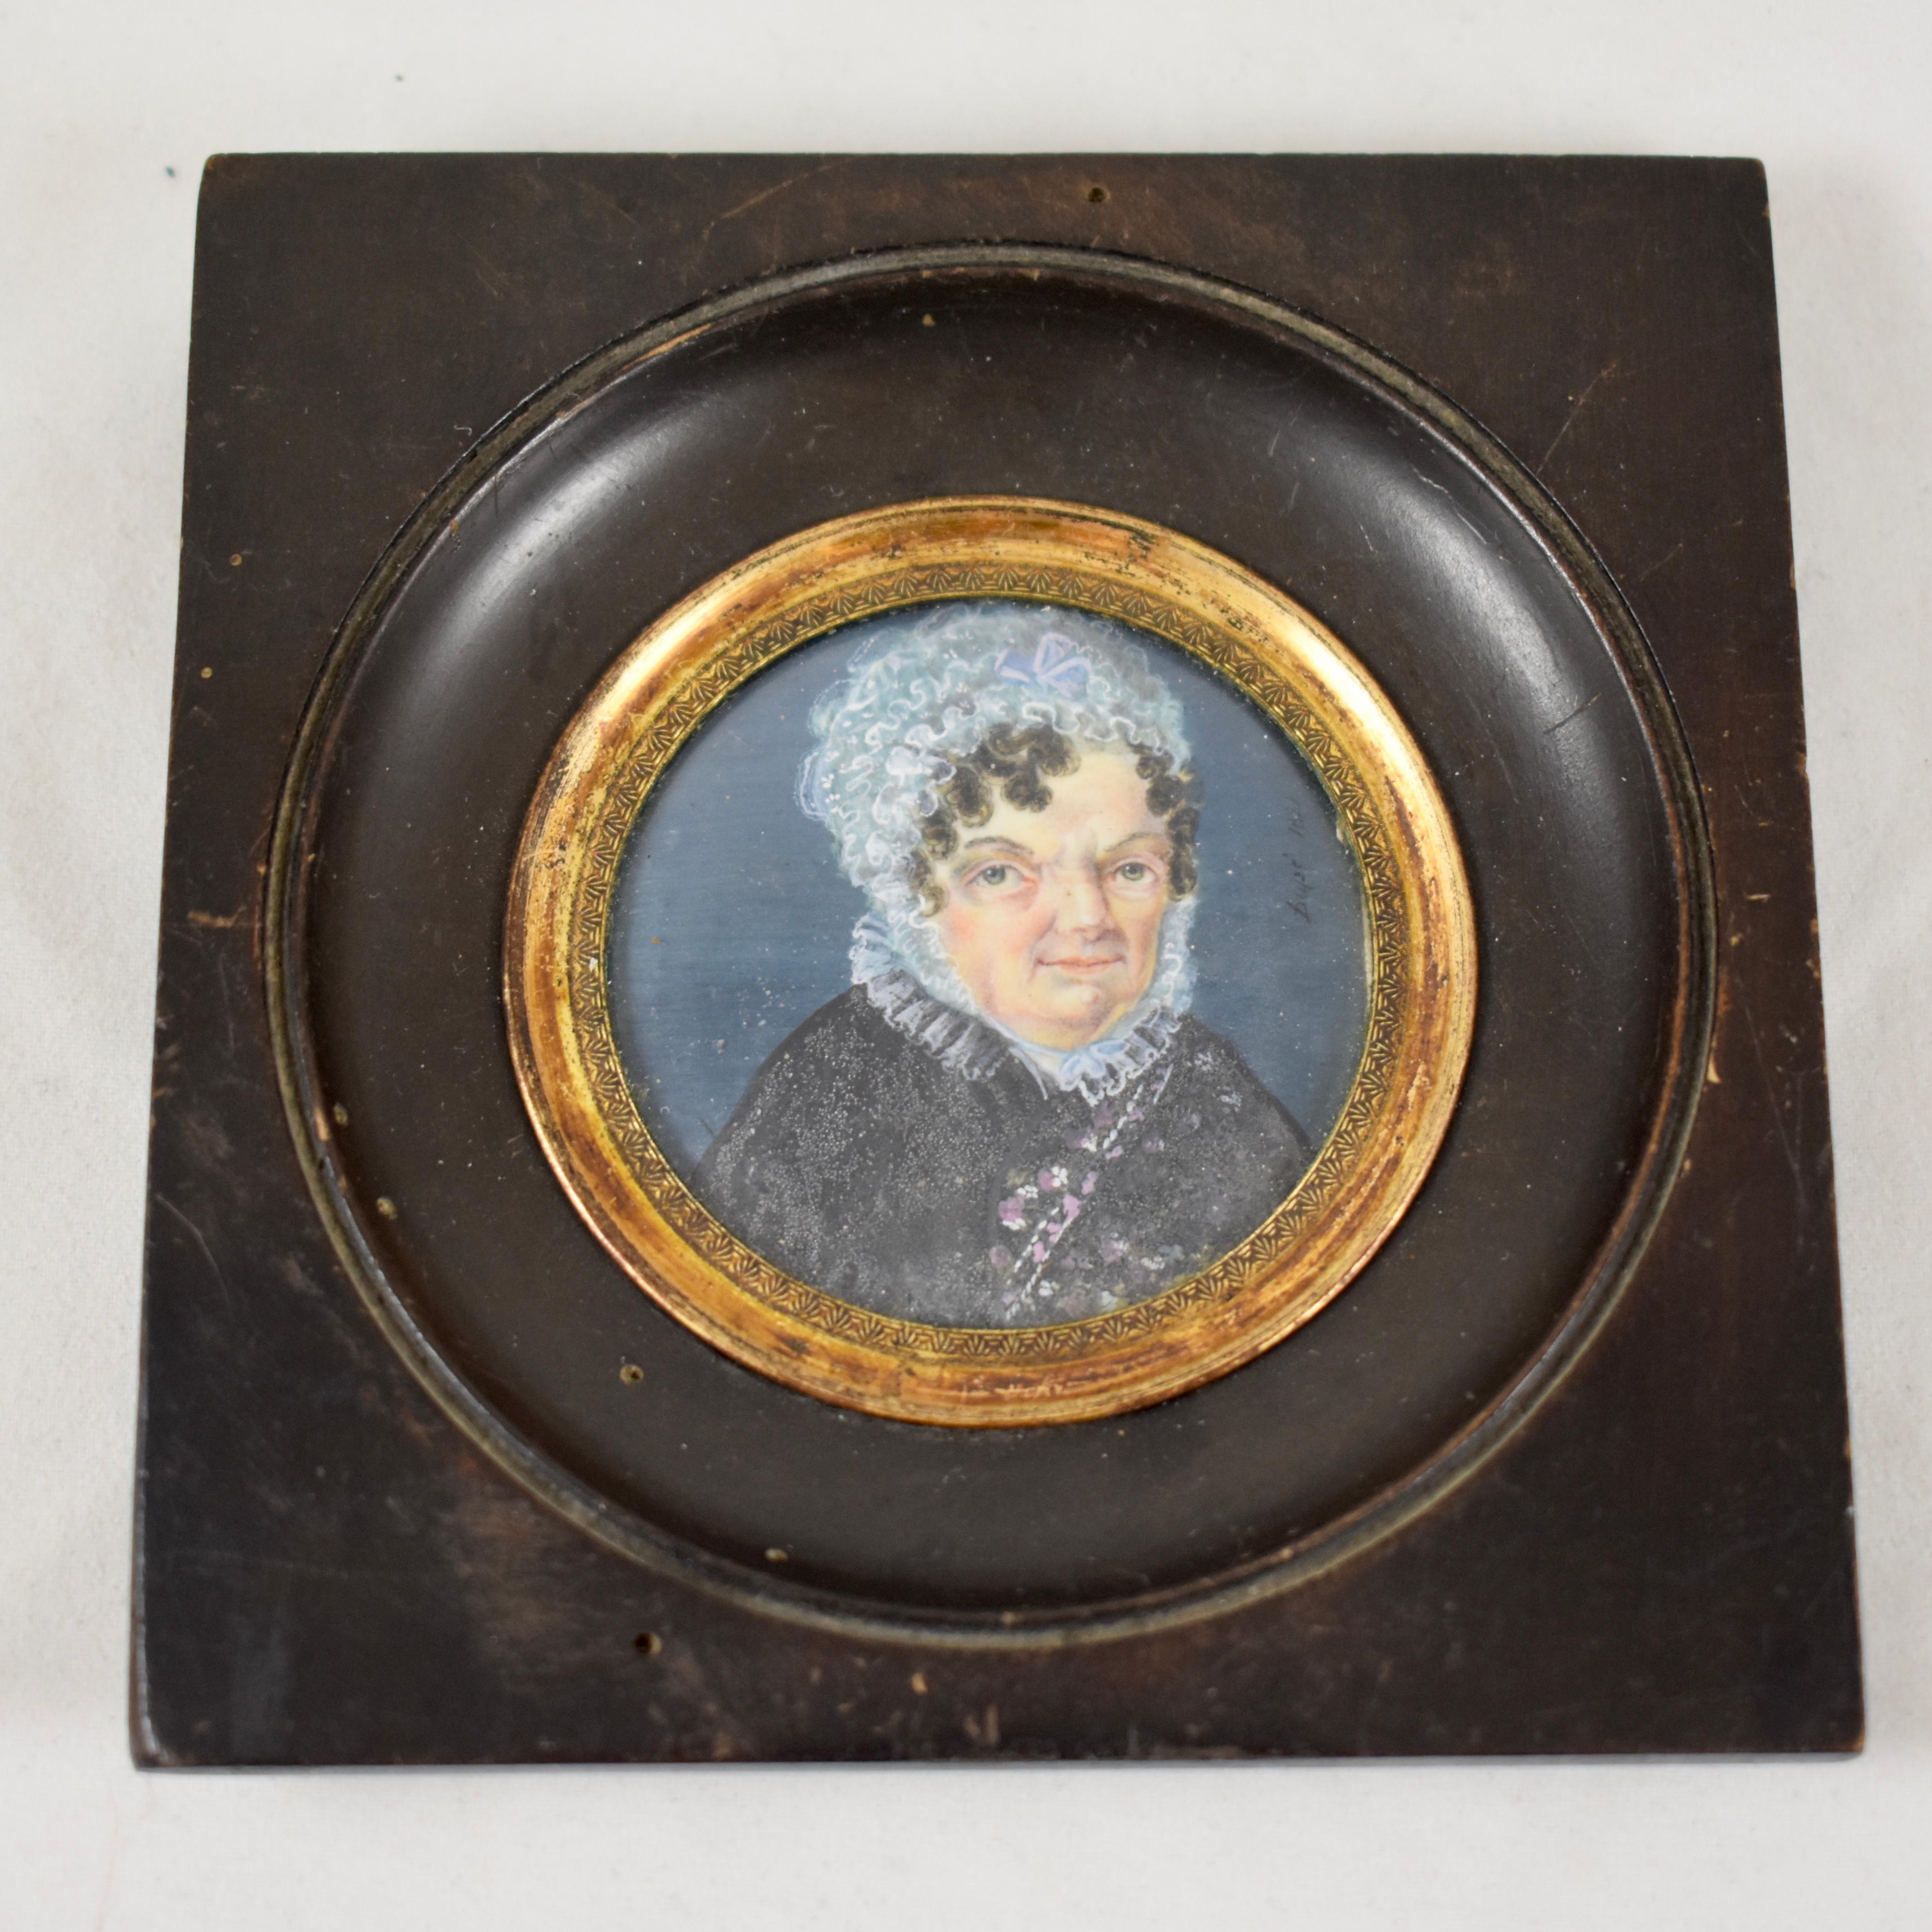 An early 19th century French hand-painted miniature portrait, framed under glass, portraying an older woman wearing a lace bonnet and a floral dress with a lace collar, reflecting the period. Illegable signature, dated 1821.

The mitered black